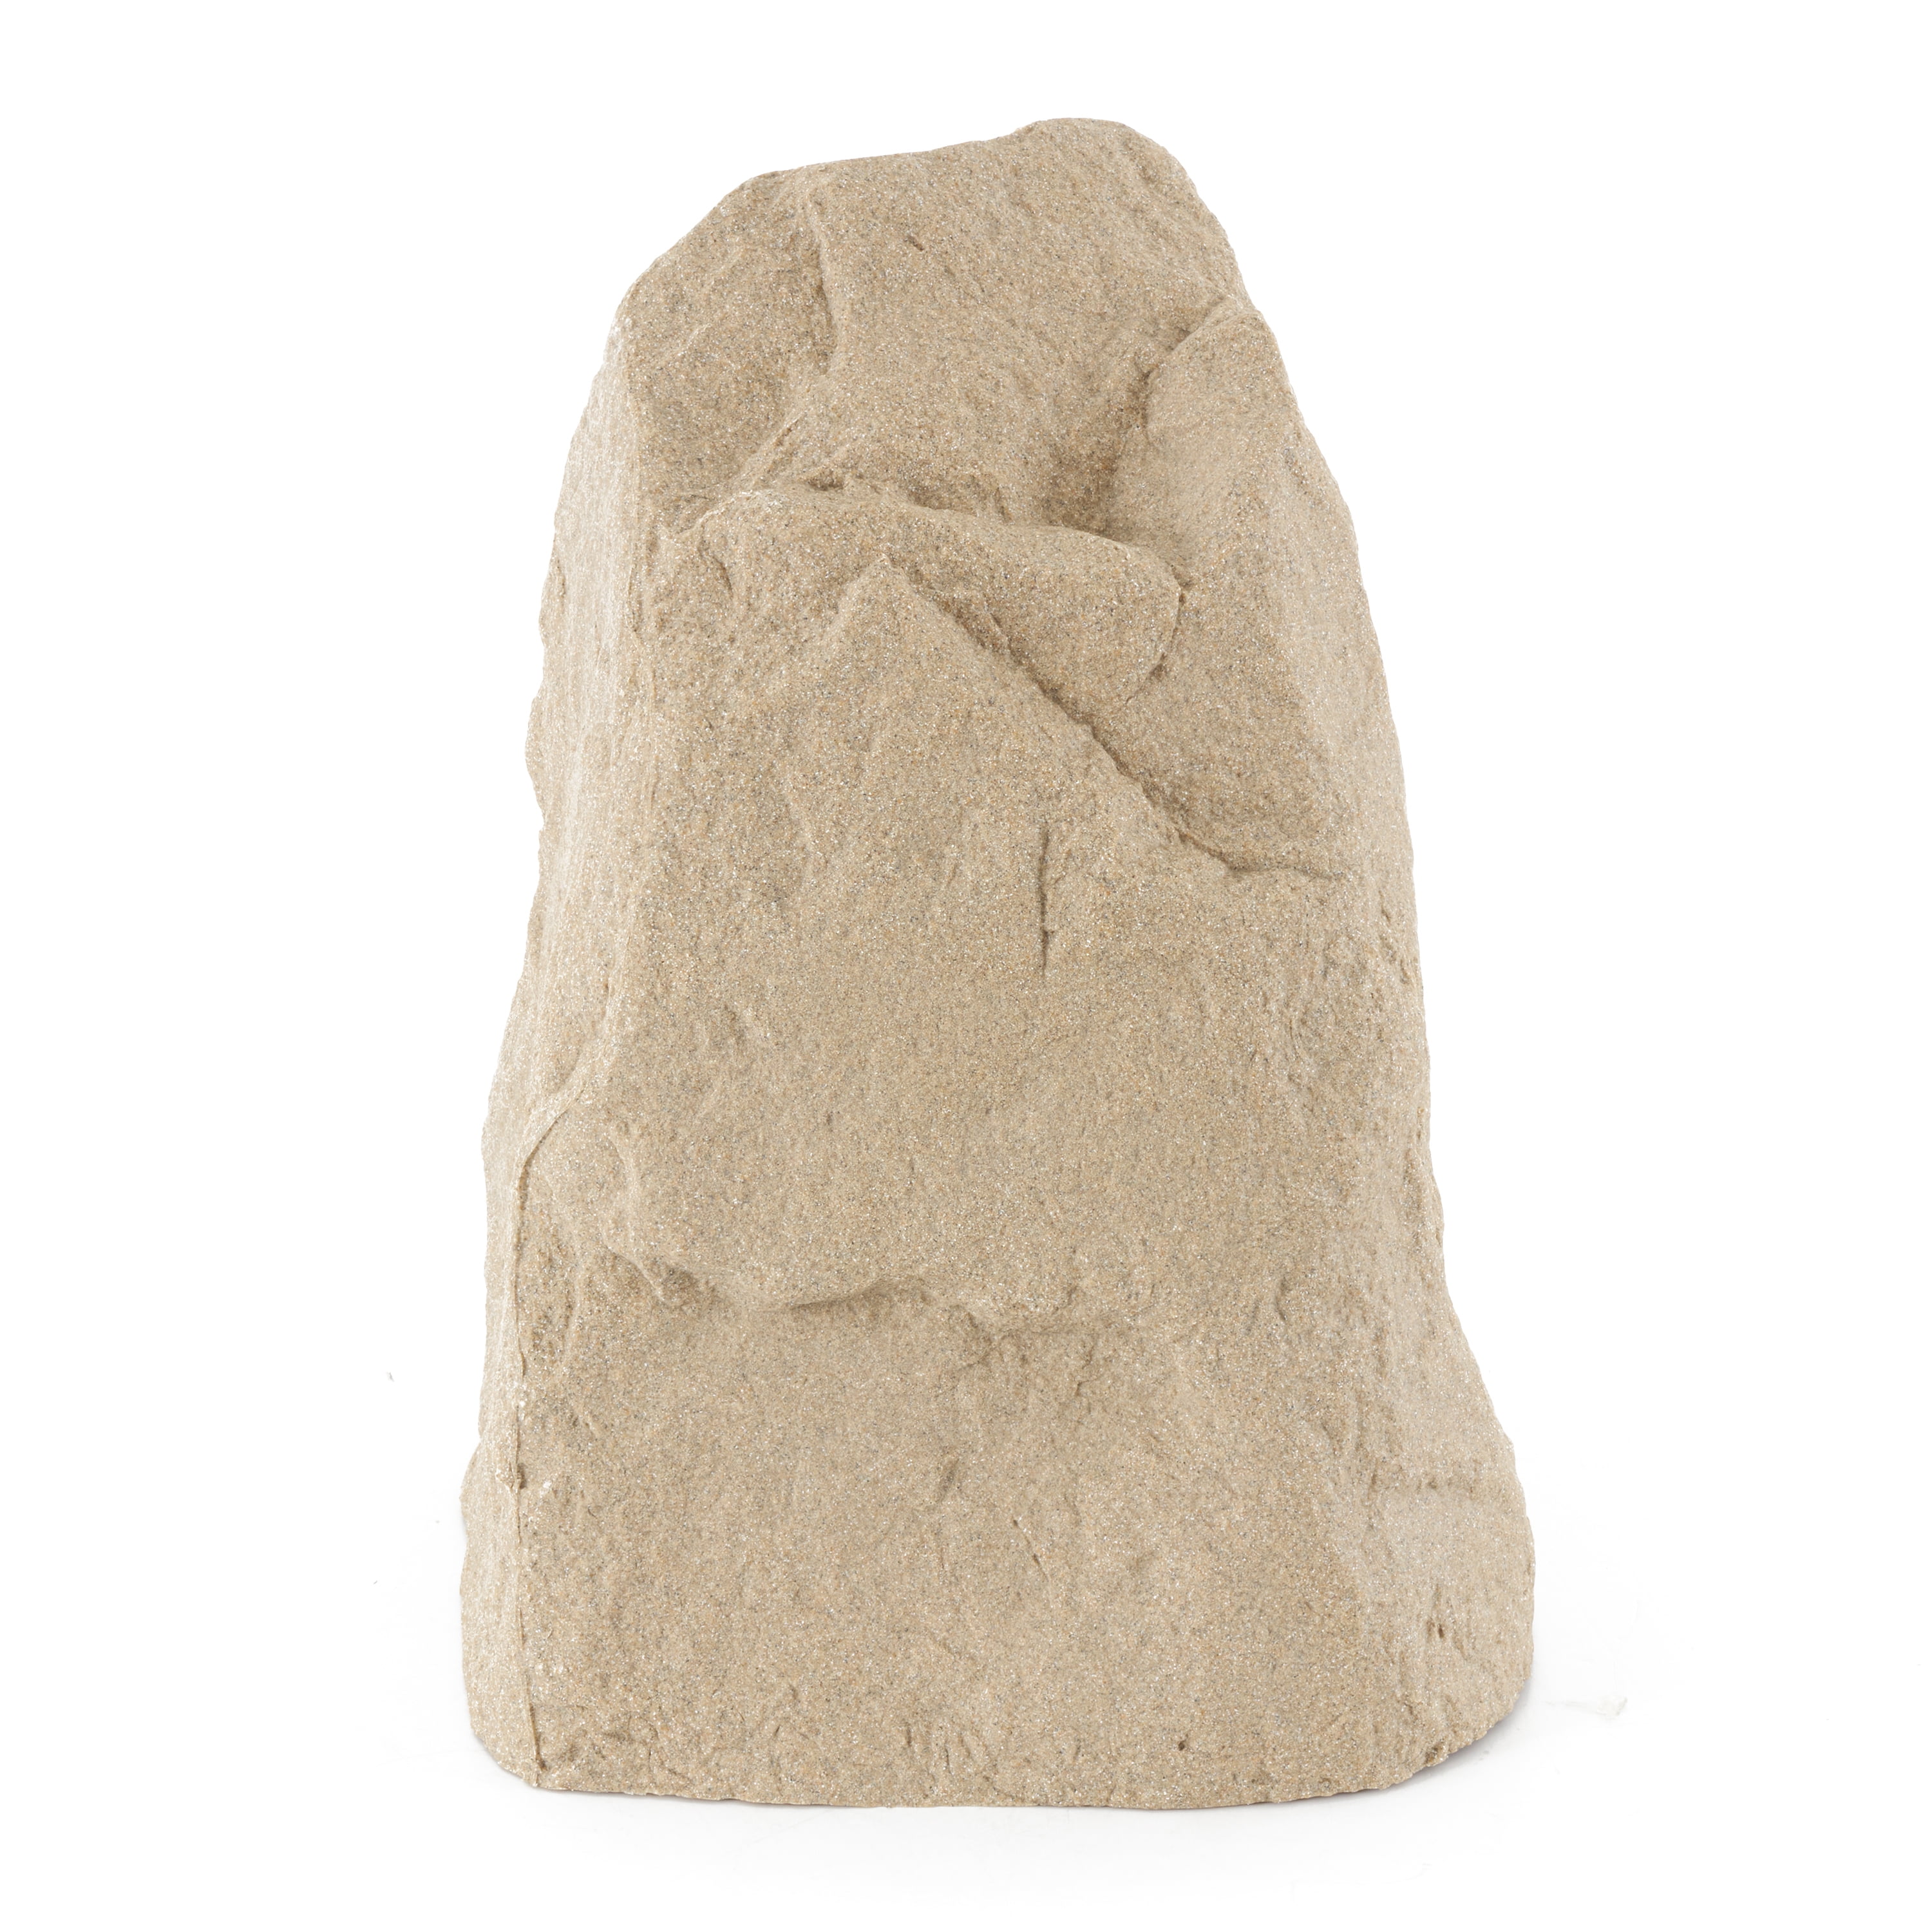 00231 21.5 X 18 X 16 In. Receptacle Poly Rock Cover & Decorative Garden Accent, Sandstone